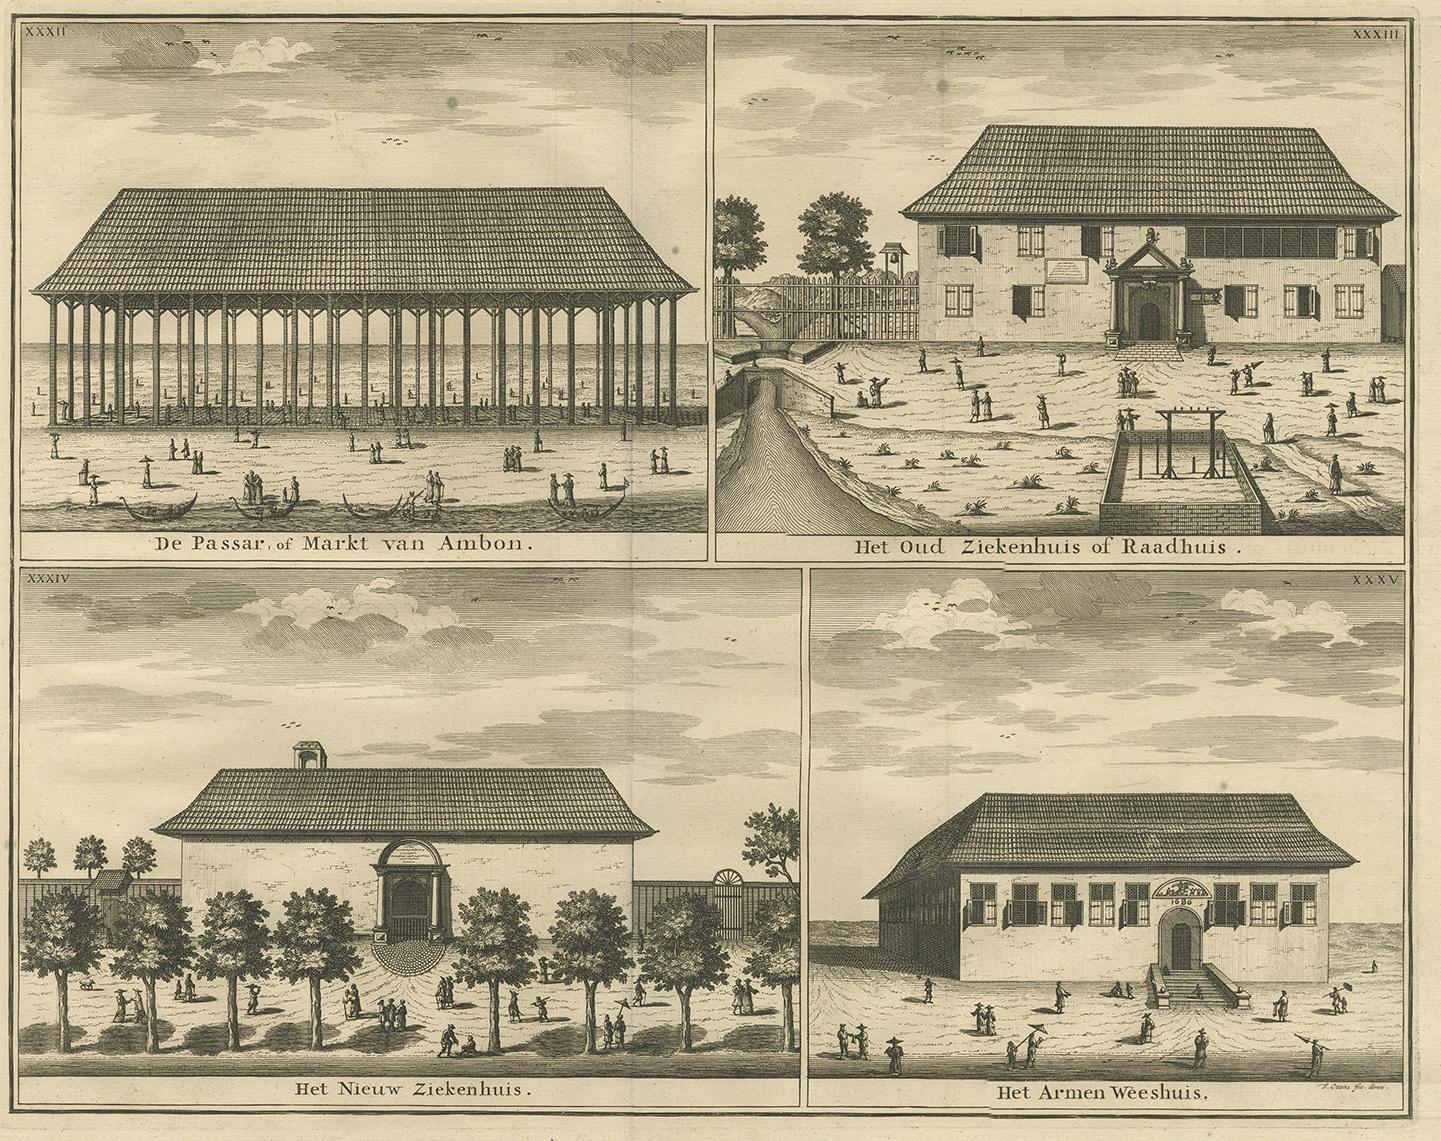 The print appears to be a collection of four separate illustrations arranged in a grid, each depicting notable buildings in Ambon, Indonesia, during the time of Dutch colonial rule. This is evidenced by the Dutch titles for each of the images, which